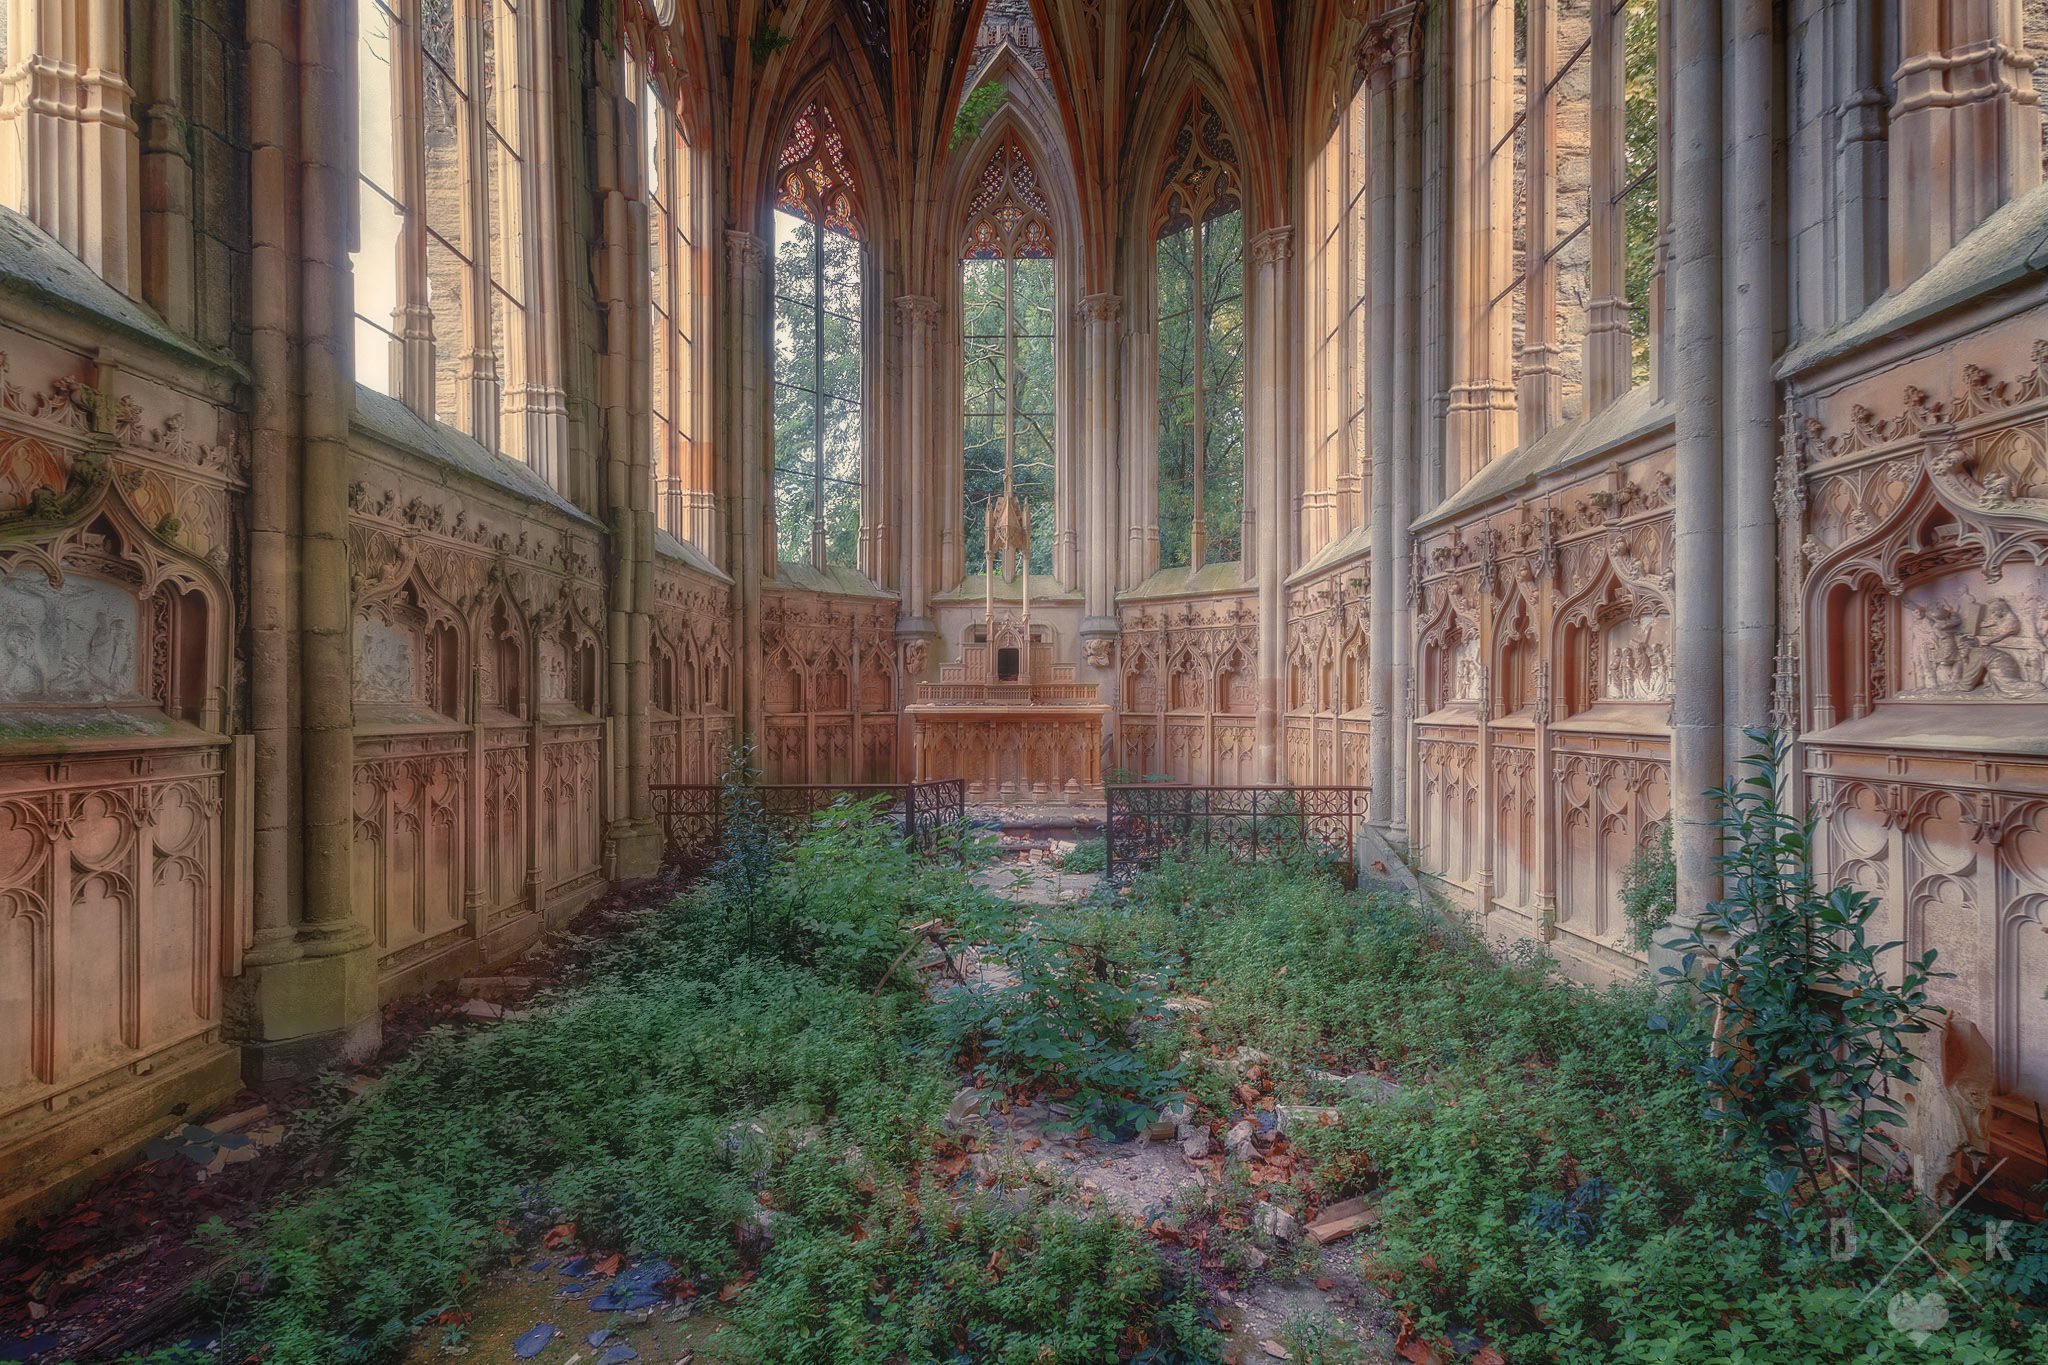 41 Strange on Twitter: "Abandoned and overgrown chapel in France by Photographer Roman Robroek… "